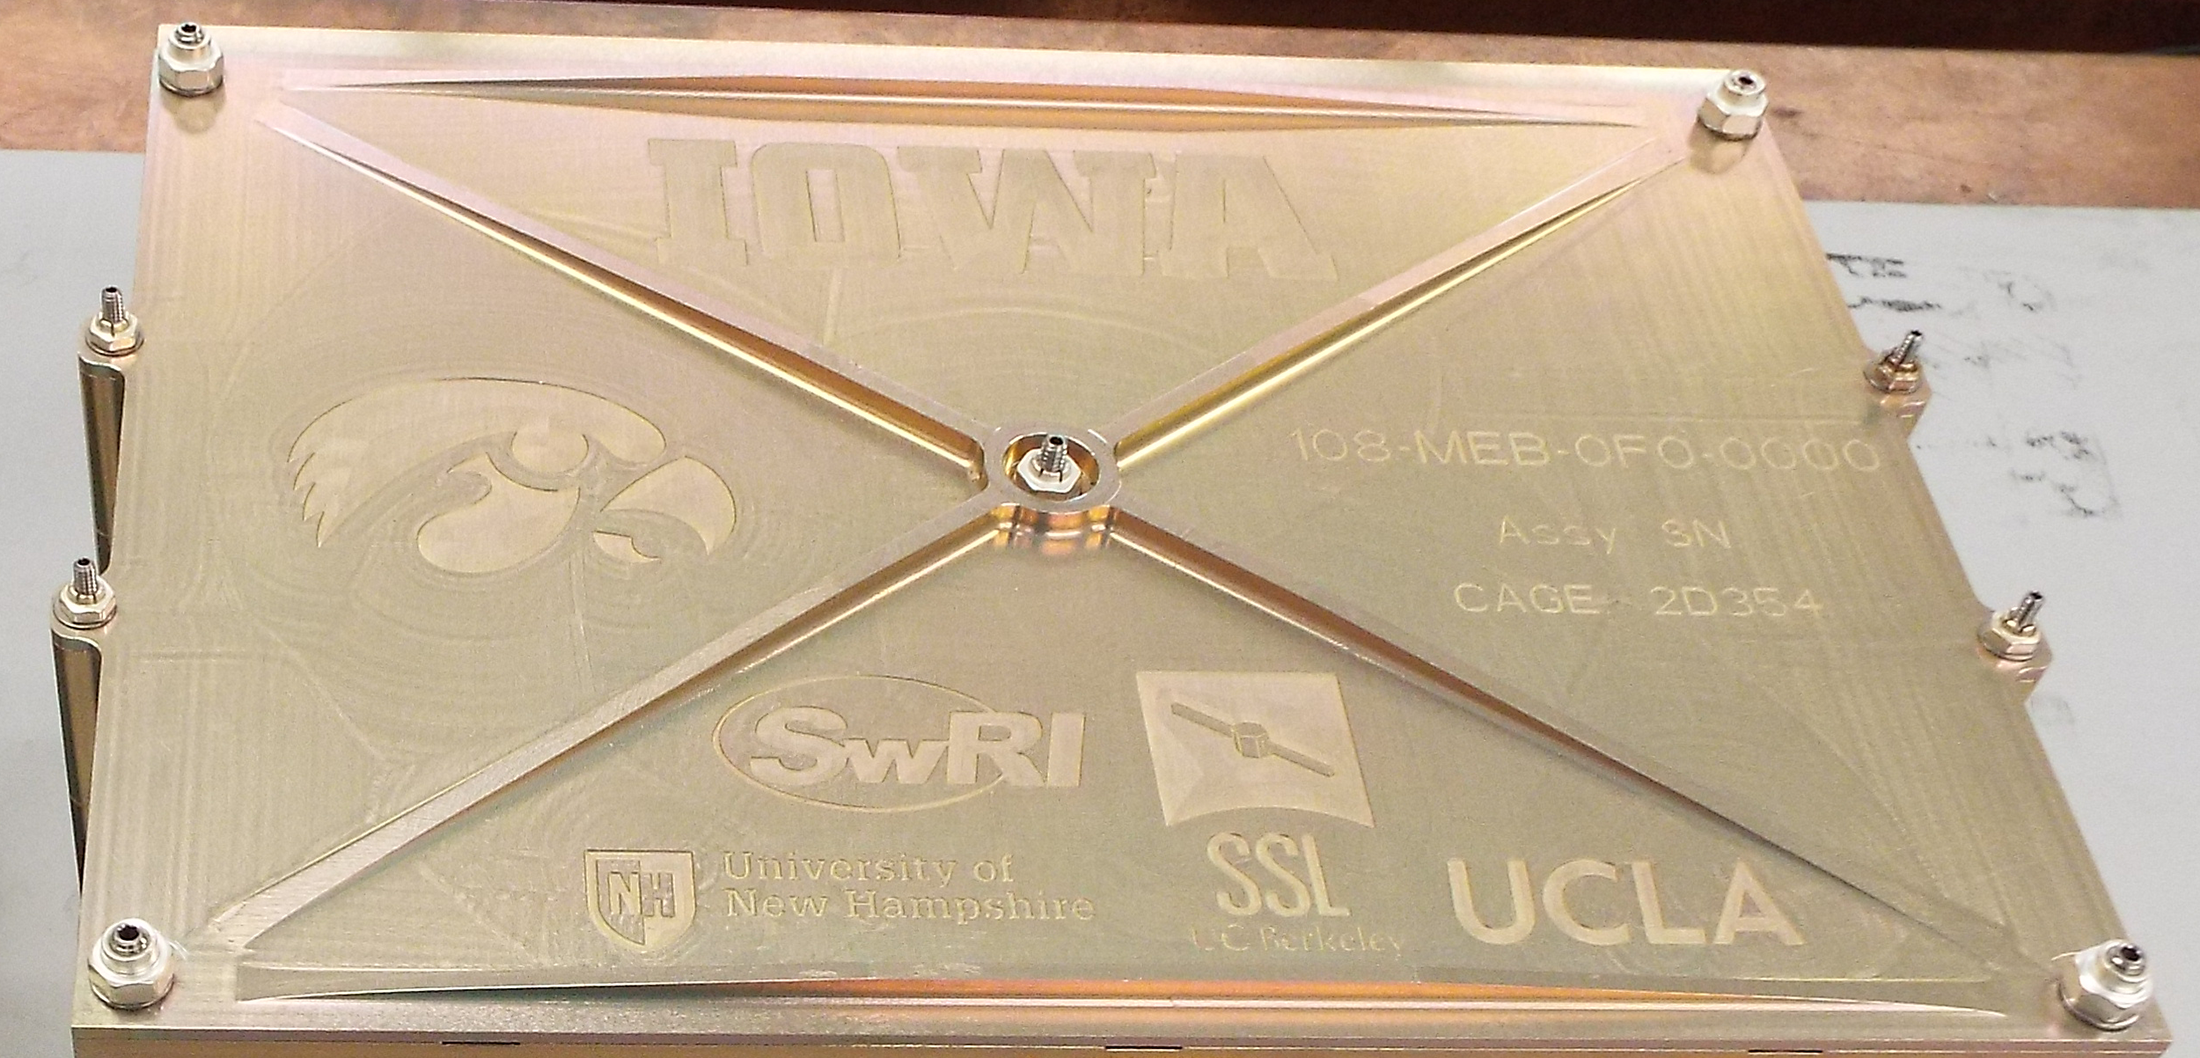 This image shows the participating schools' logos, which are etched into the top surface of the Main Electronics Box (MEB) used on both TRACERS satellites.